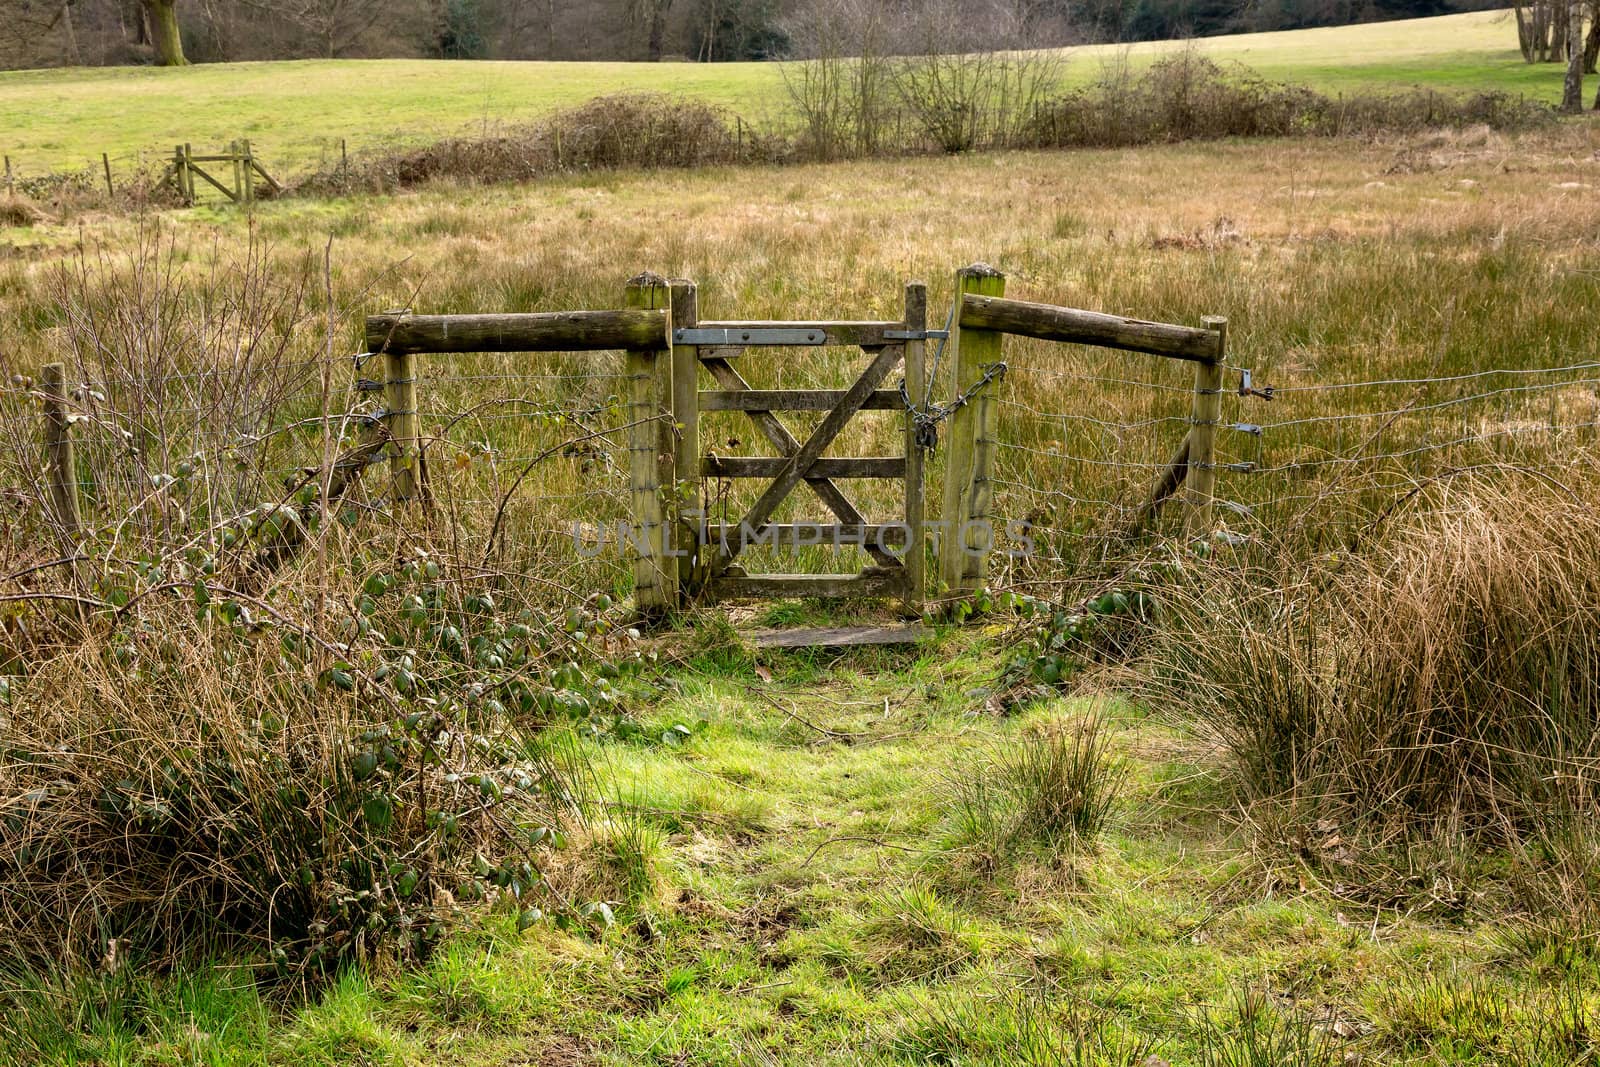 Closed Old Rustic Gate in Green Grassy Countryside on Sunny Day